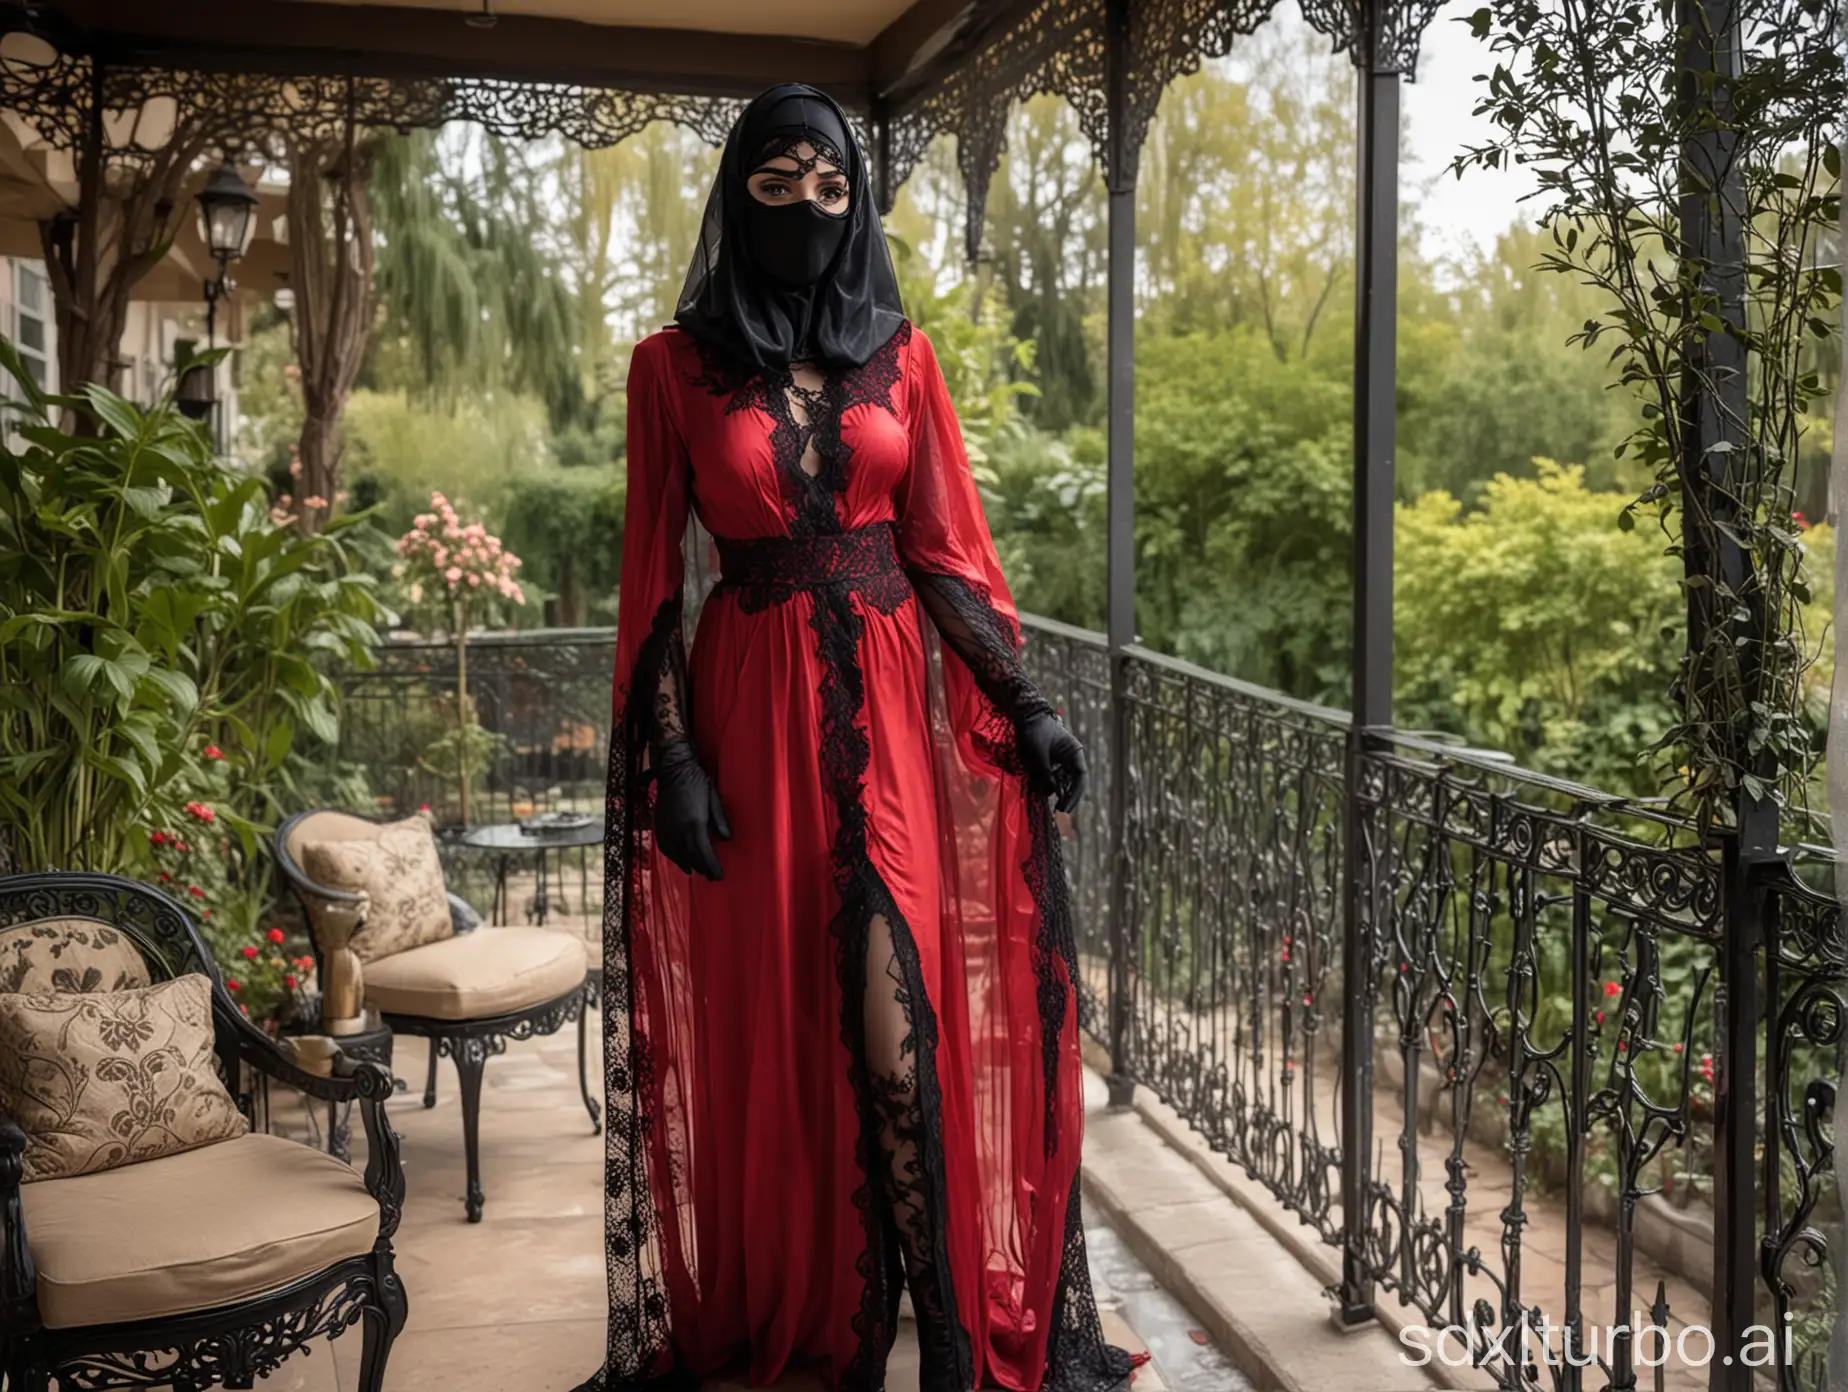 feminized man, sissy standing, small breasts, red abaya, blue eyes, black niqab, mask on mouth, mask with transparent lace veil over the eyes, high heels. Black gloves. Outside on luxury terrace, garden lounge.